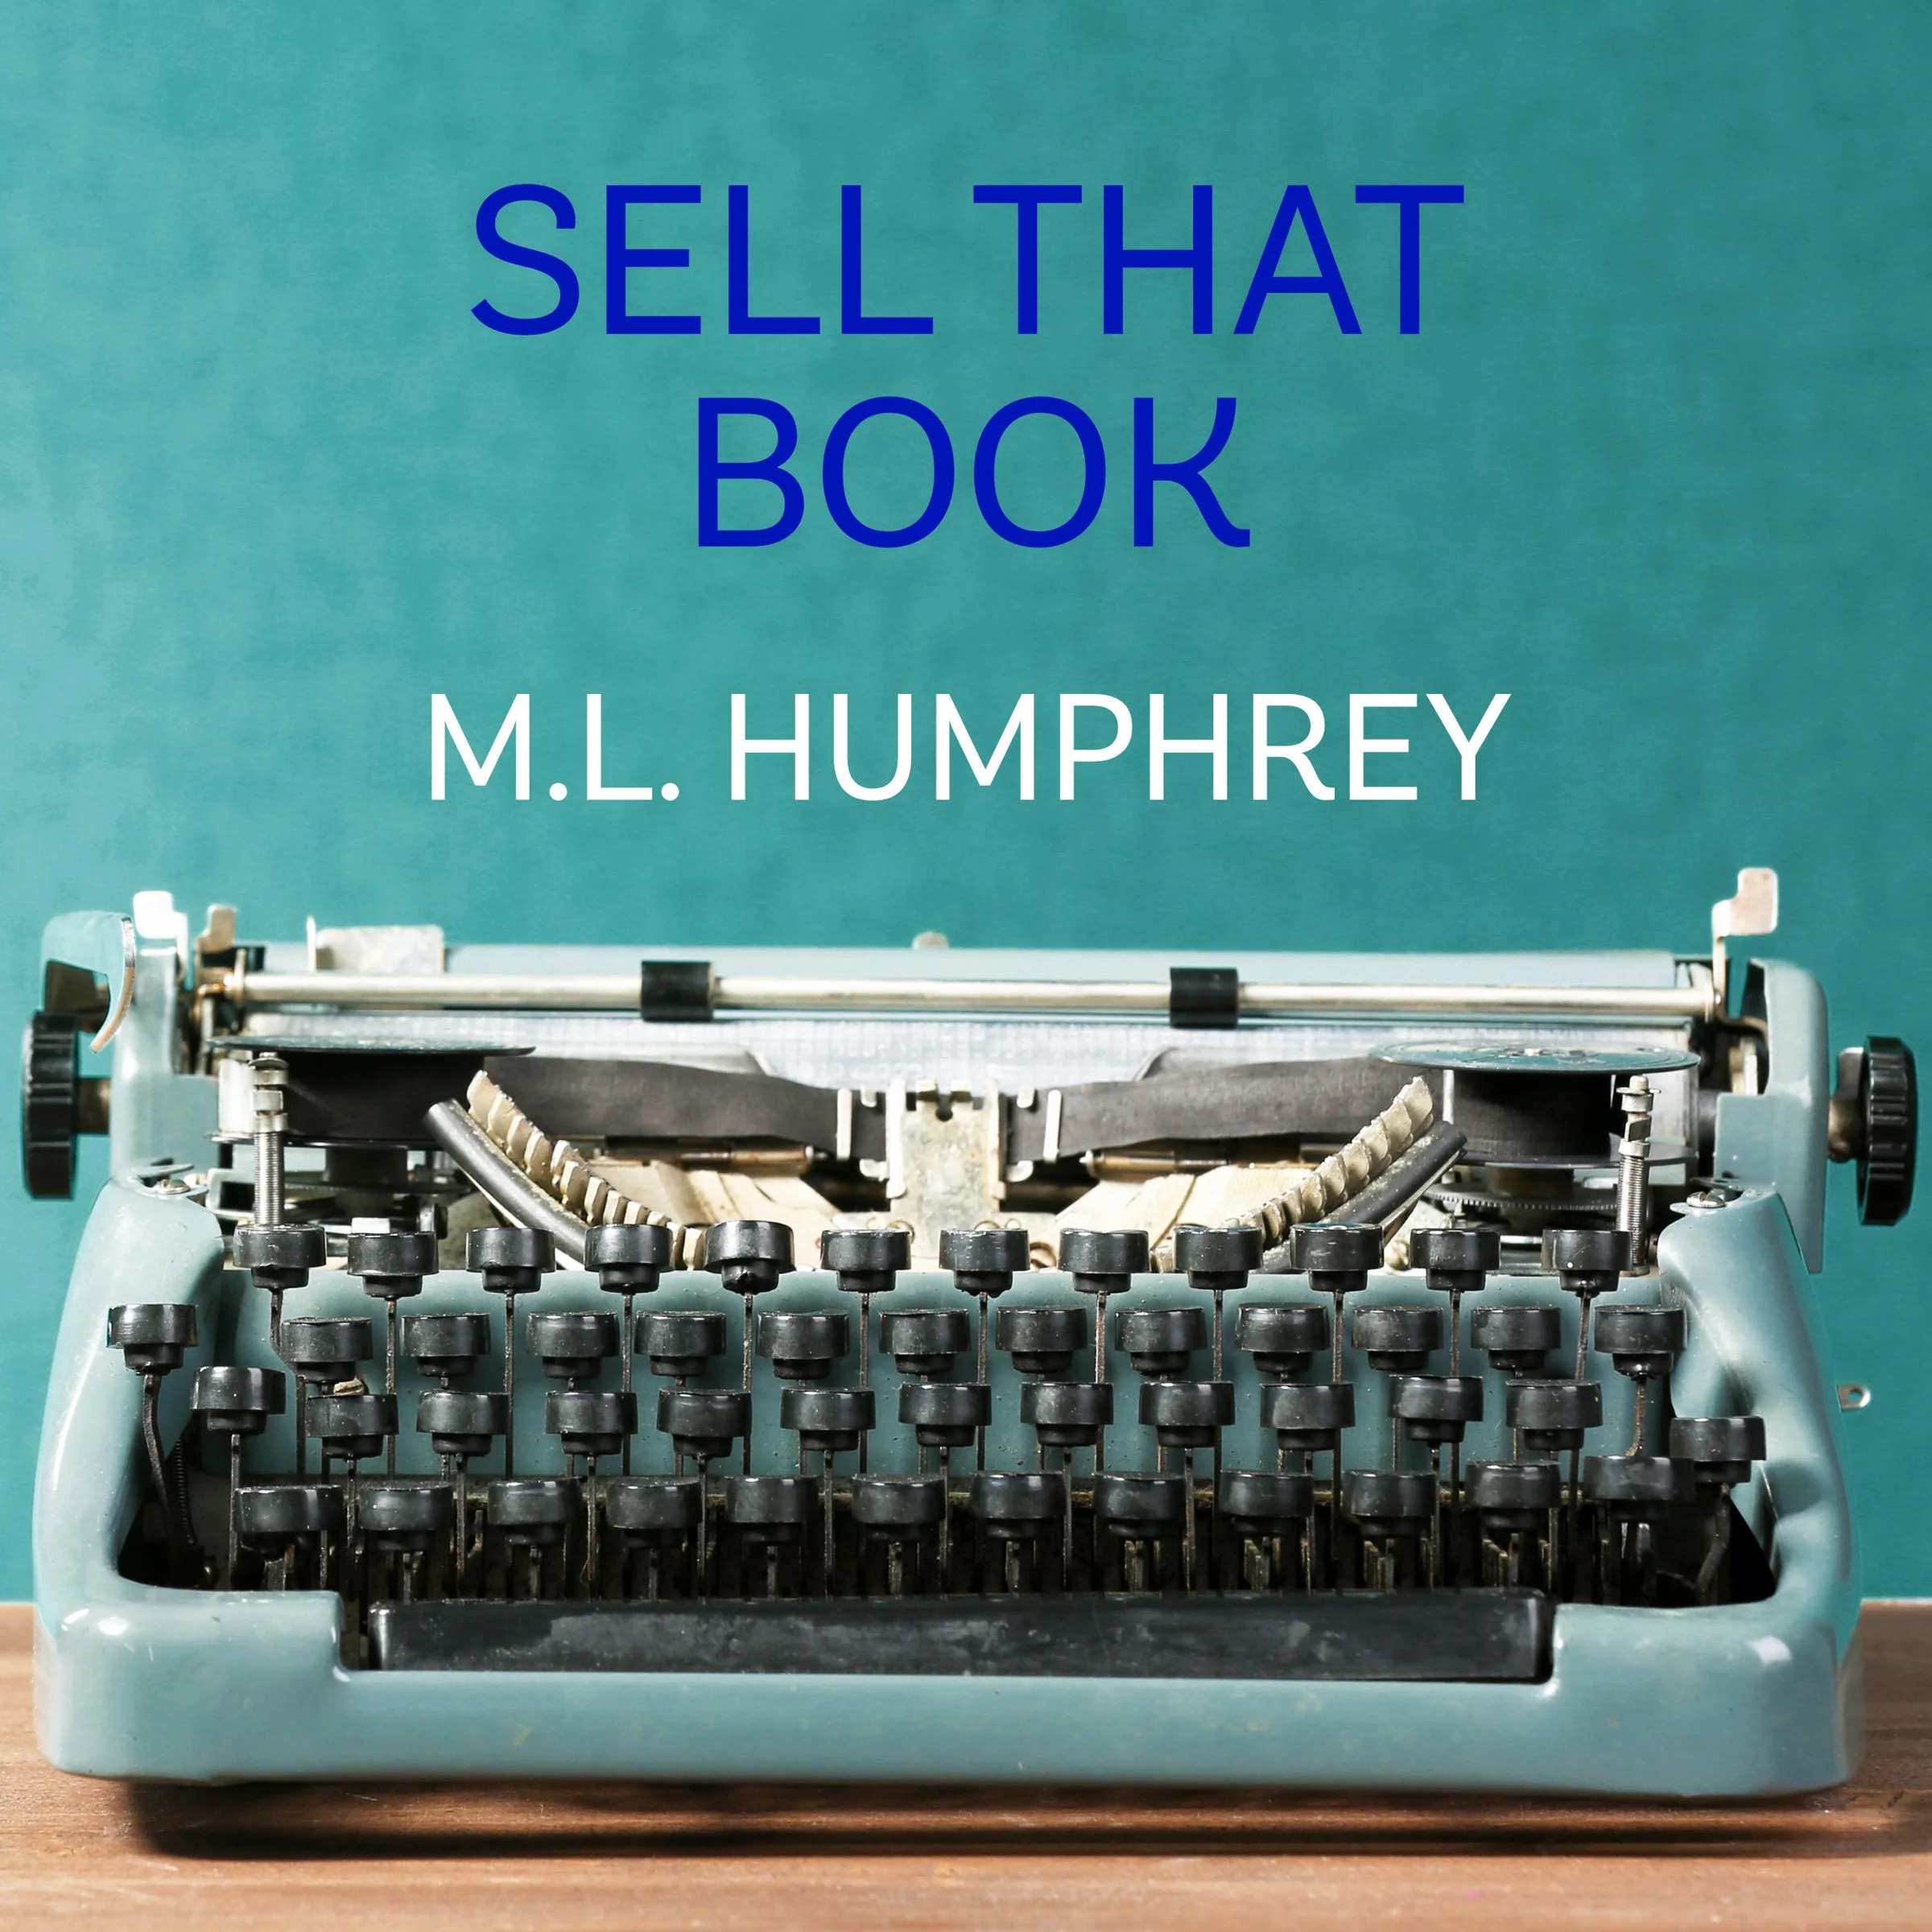 Sell That Book Audiobook by M.L. Humphrey